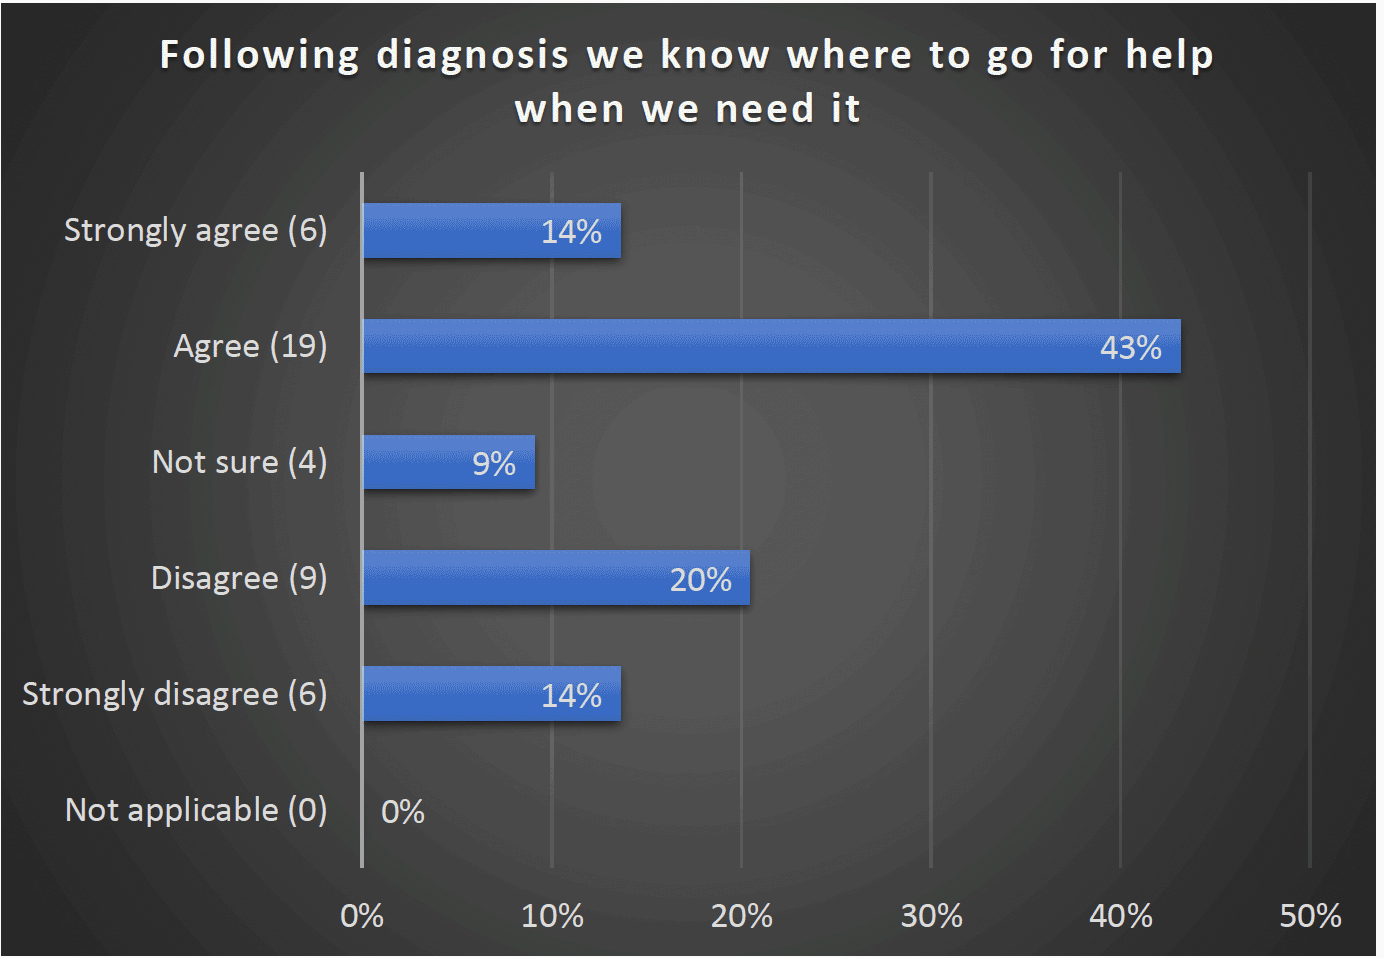 Following diagnosis we know where to go for help when we need it - Strongly agree (6) 14%, Agree (19) 43%, Not sure (4) 9%, Disagree (9) 20%, Strongly disagree (6) 14%